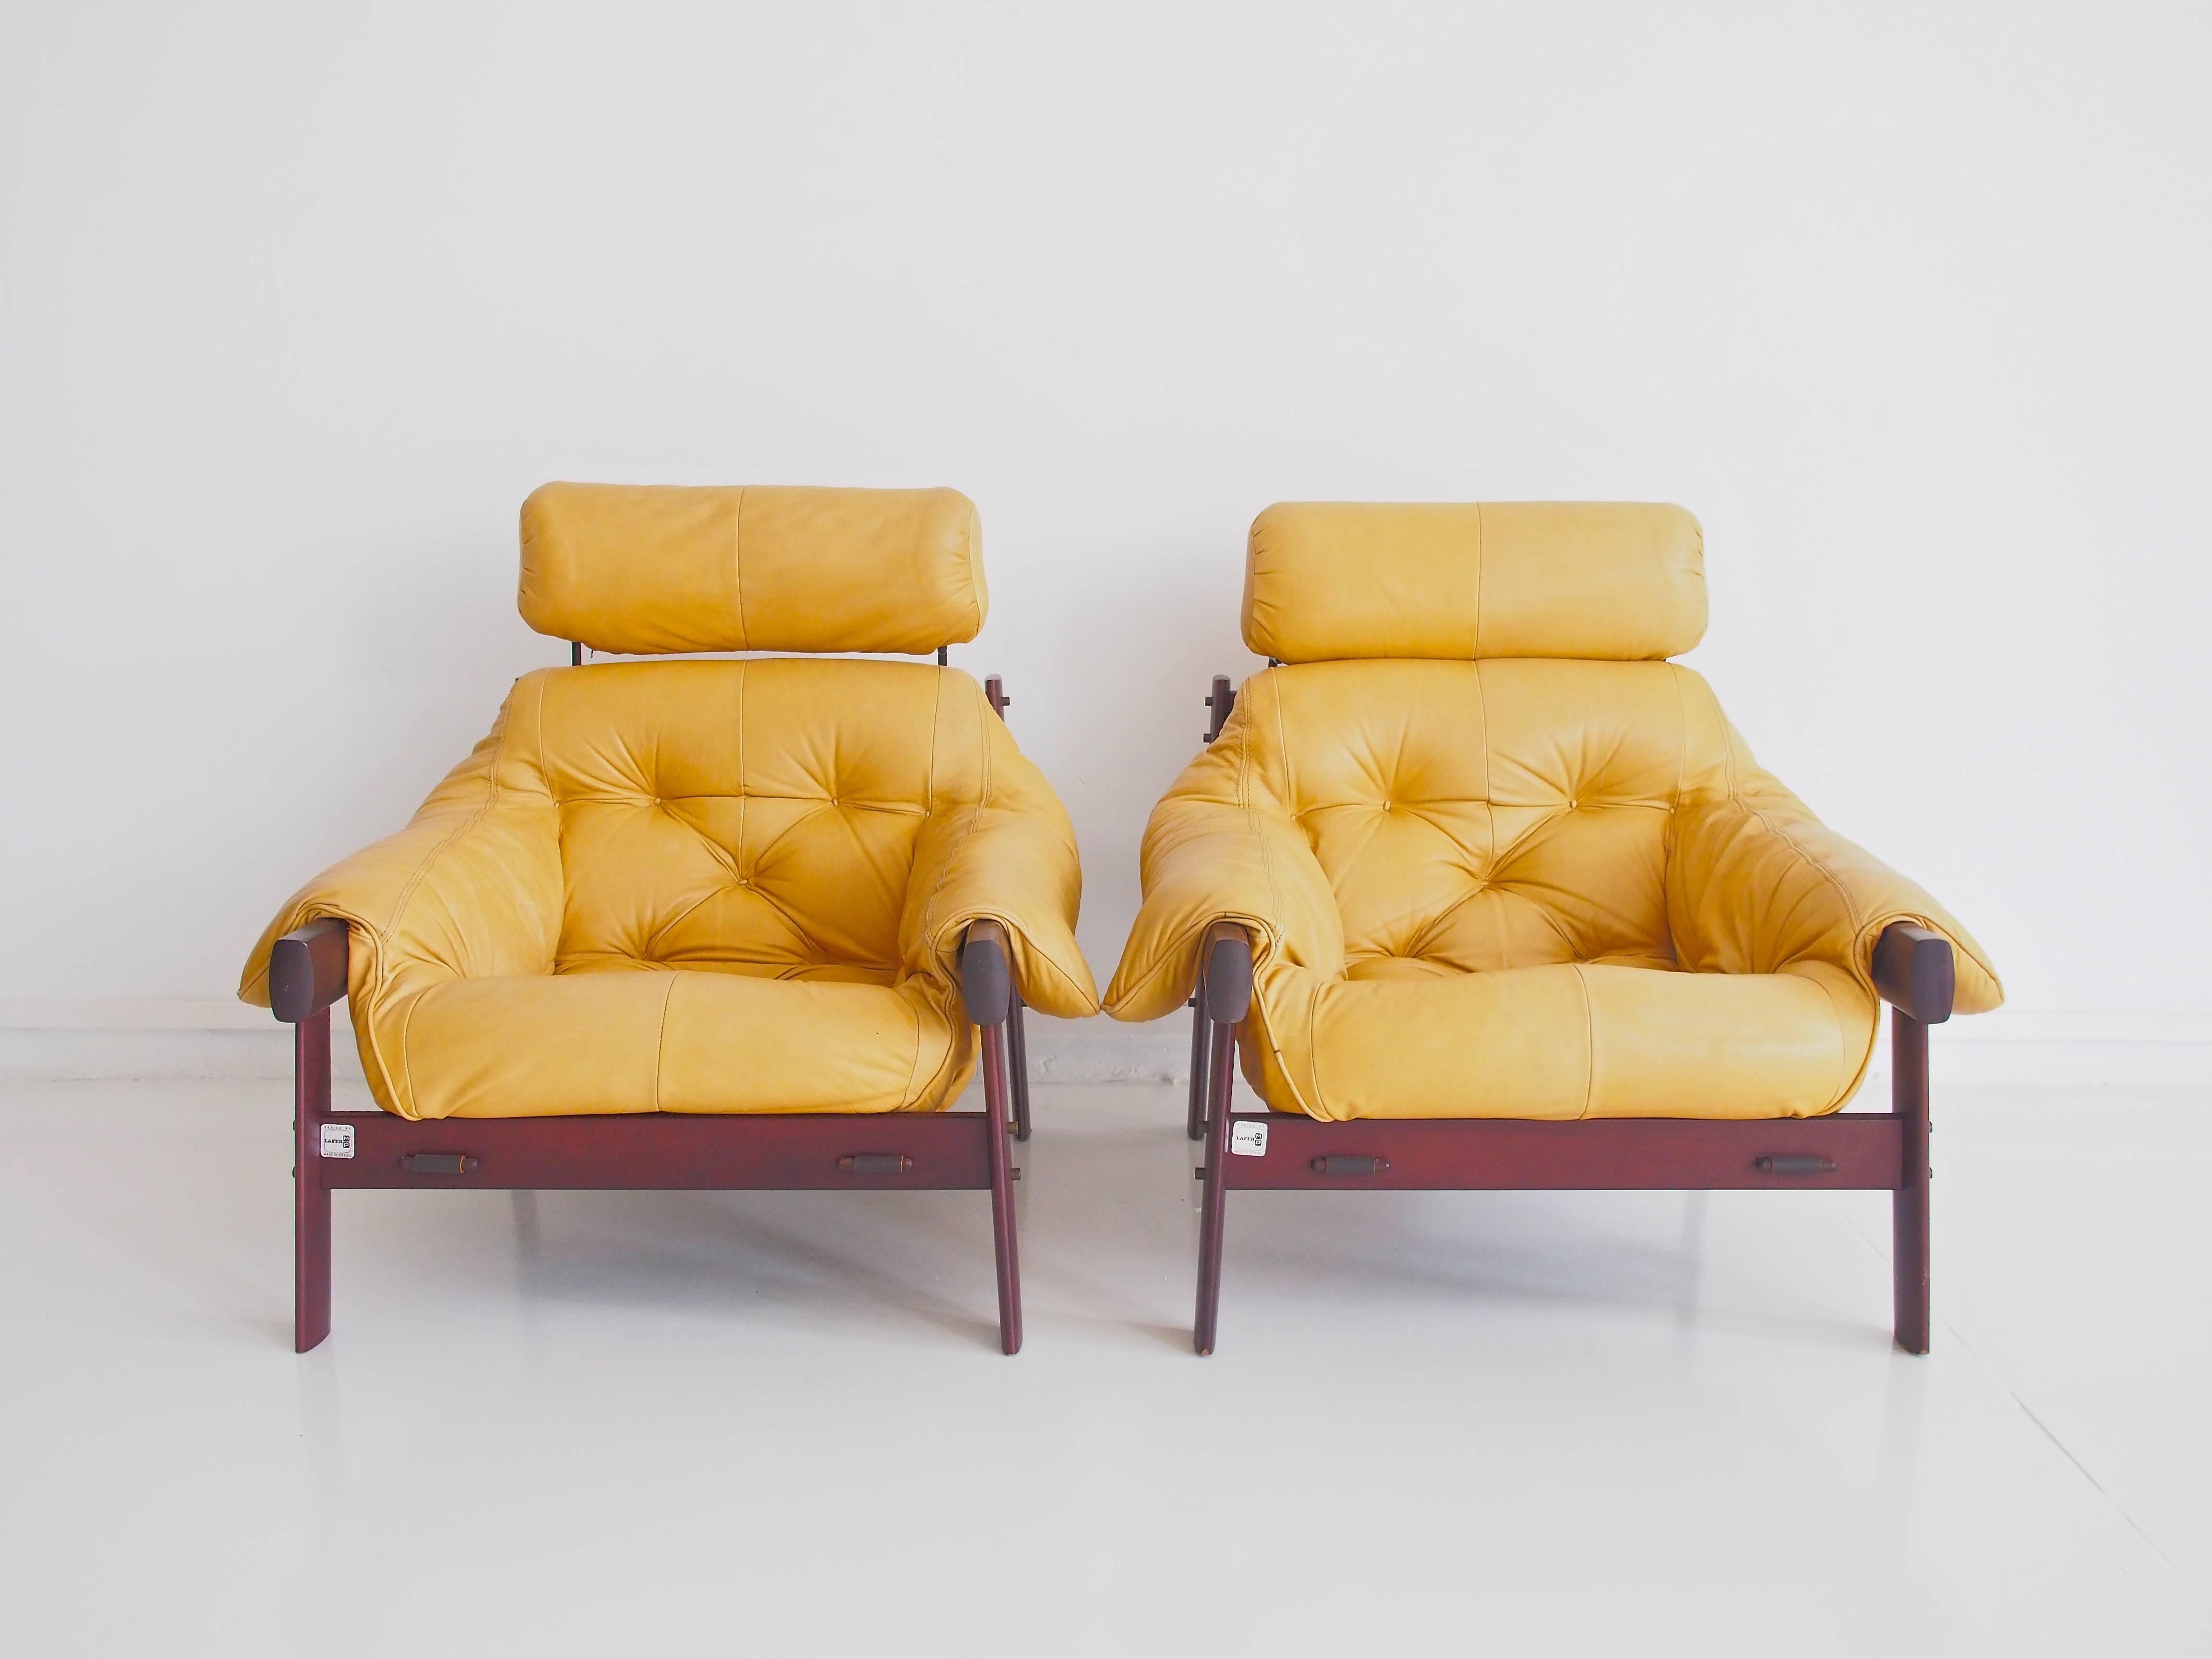 Pair of fantastic armchairs and a footstool designed by Percival Lafer, model MP-041. Frame made of Brazilian mahogany, upholstered in light brown/yellow leather. Manufactured by Lafer co. Furniture in Brazil in the 1960s.